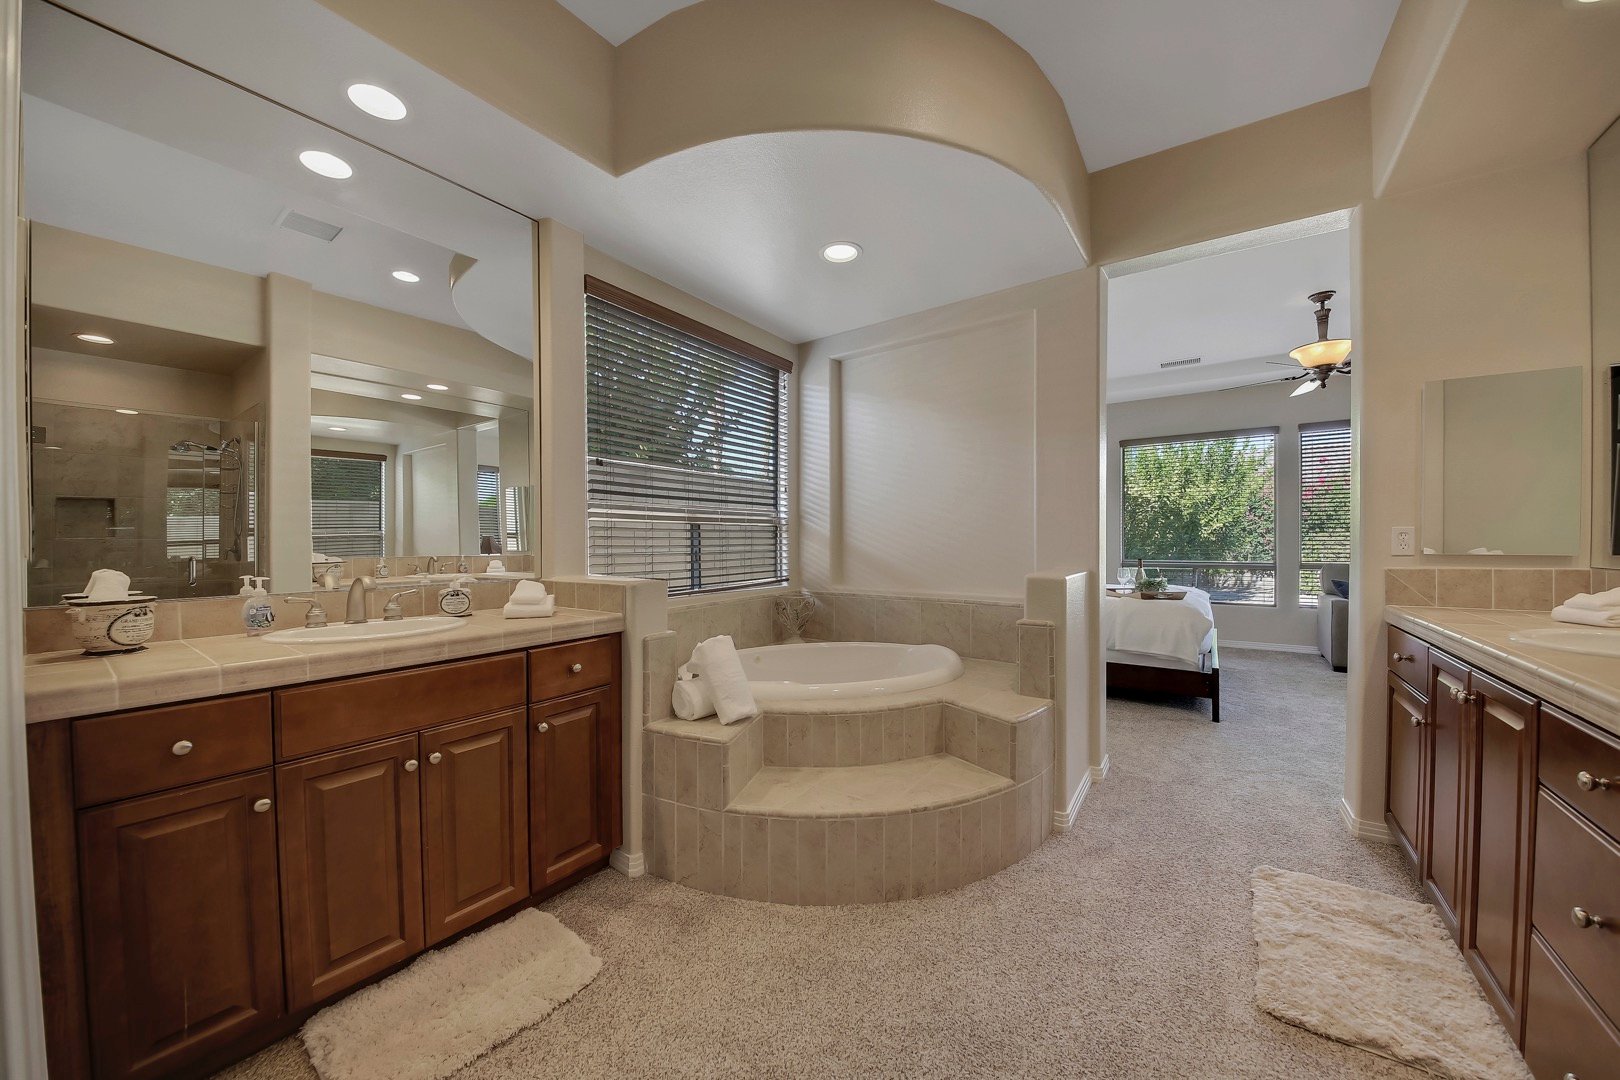 Master Suite 1 bathroom features a jacuzzi tub, tile shower, and two vanity sinks.